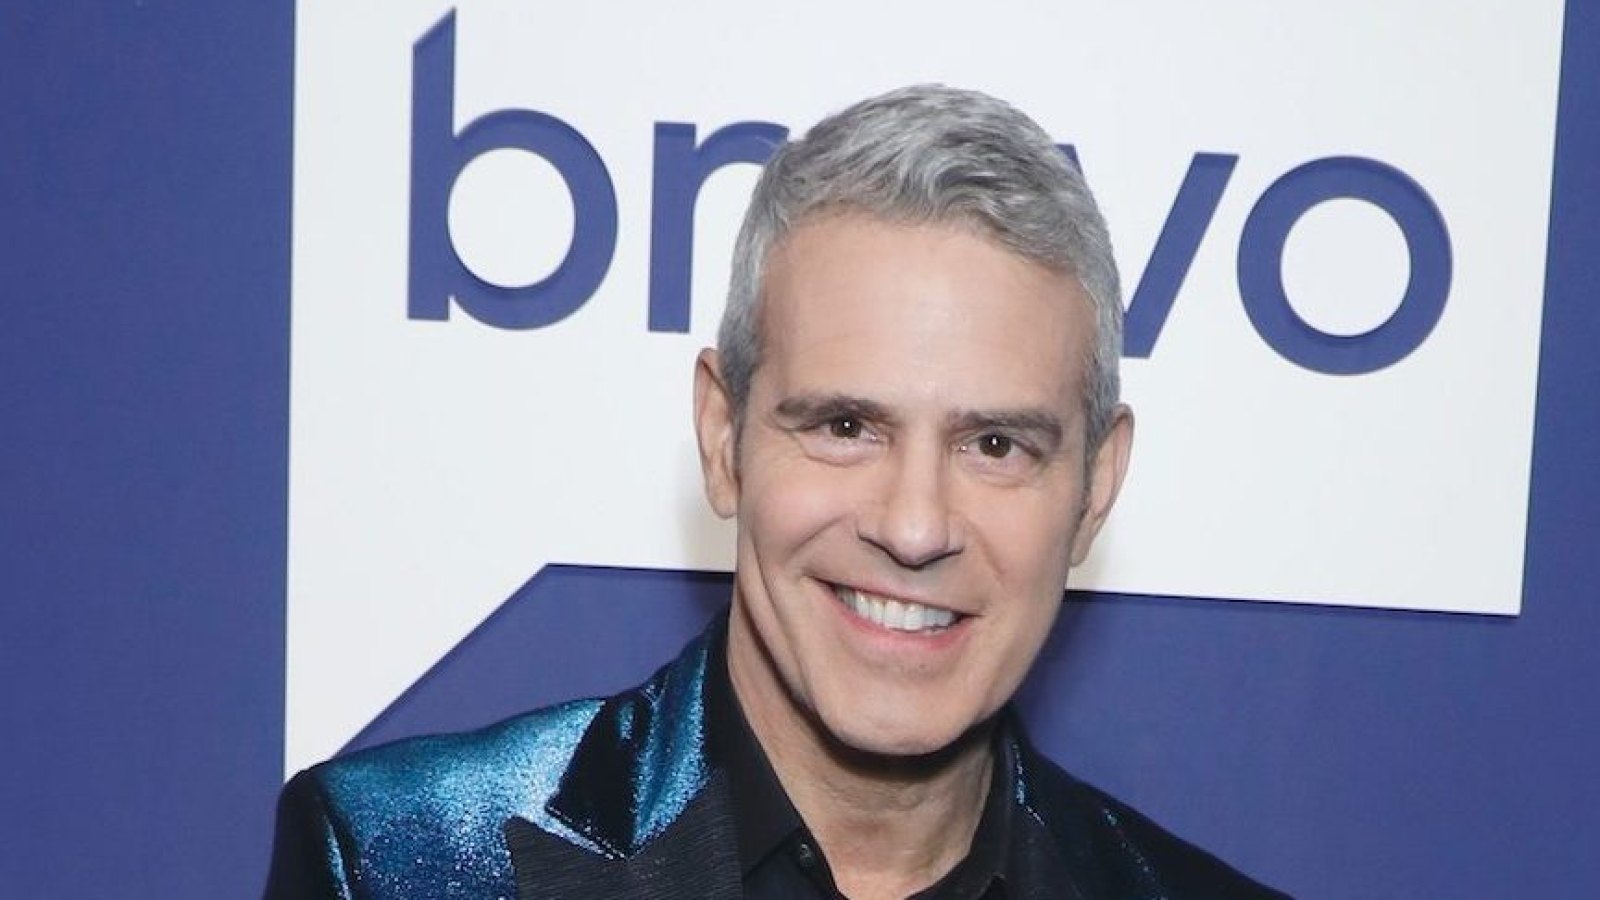 Andy Cohen Says 'Vanderpump Rules' Fans 'Won't Believe' This Week's 'Shocking' Episode: 'It Was Not Recut'